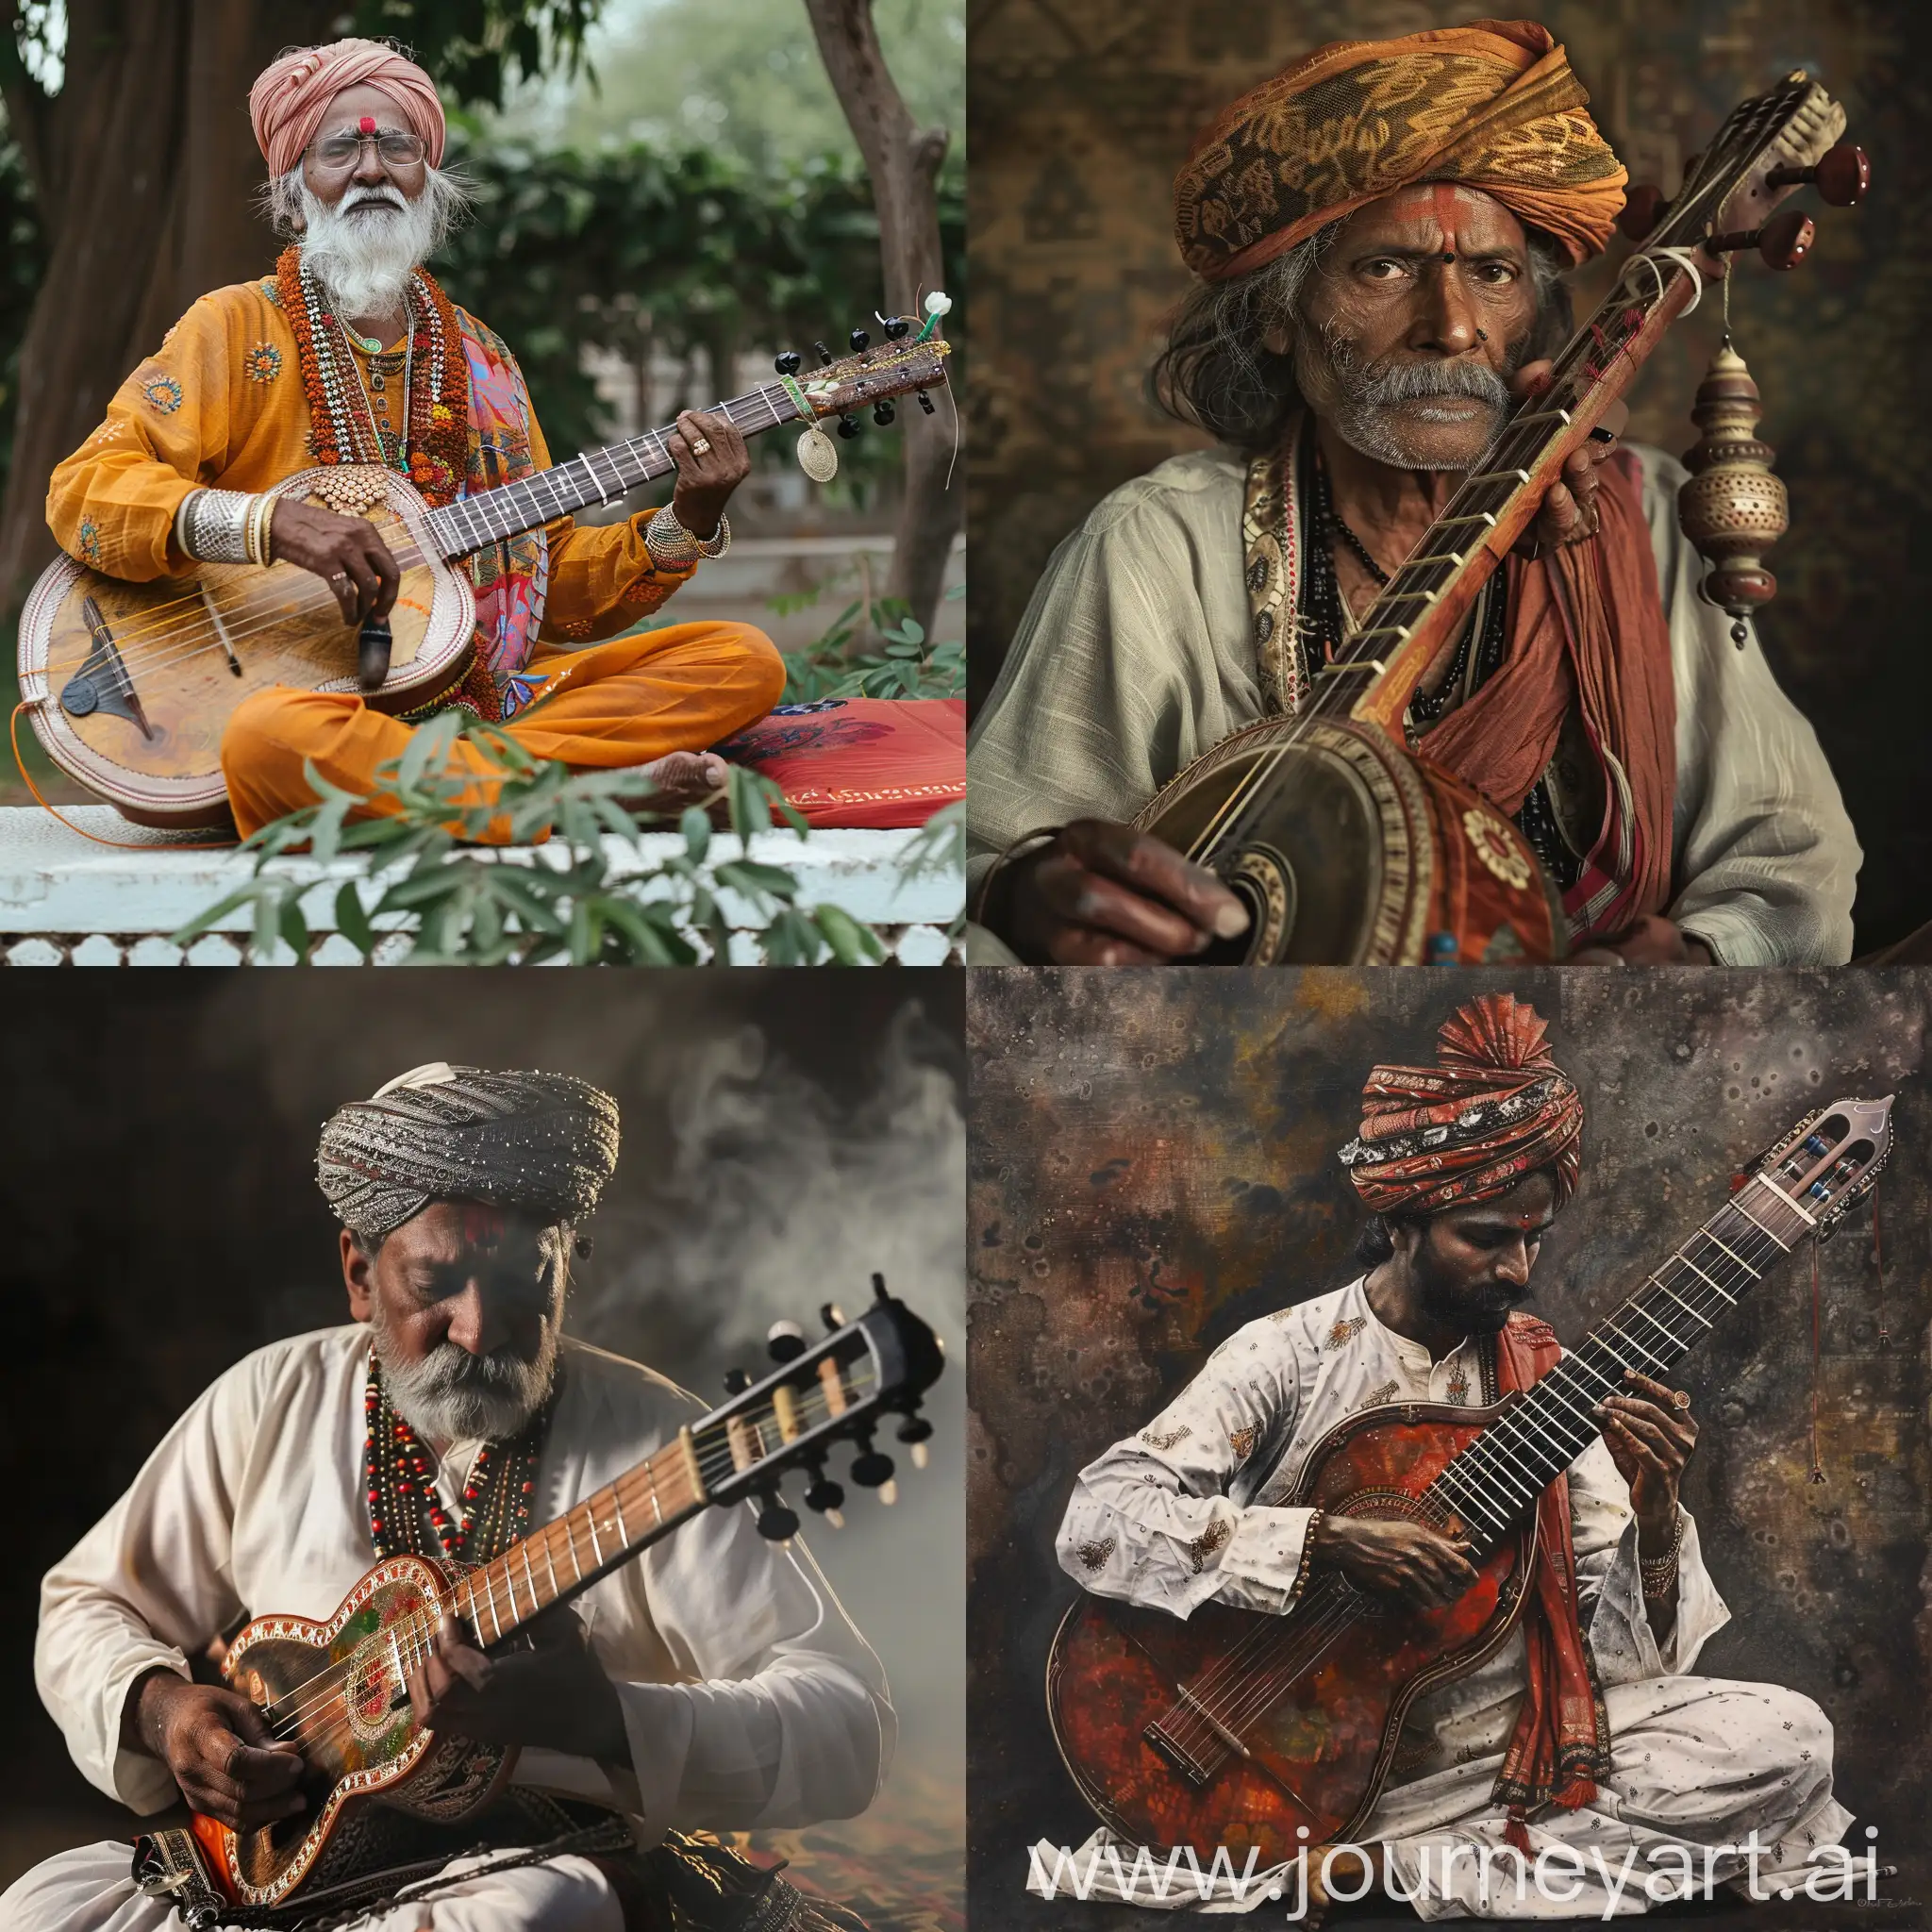 Traditional-Indian-Musician-Playing-a-Sitar